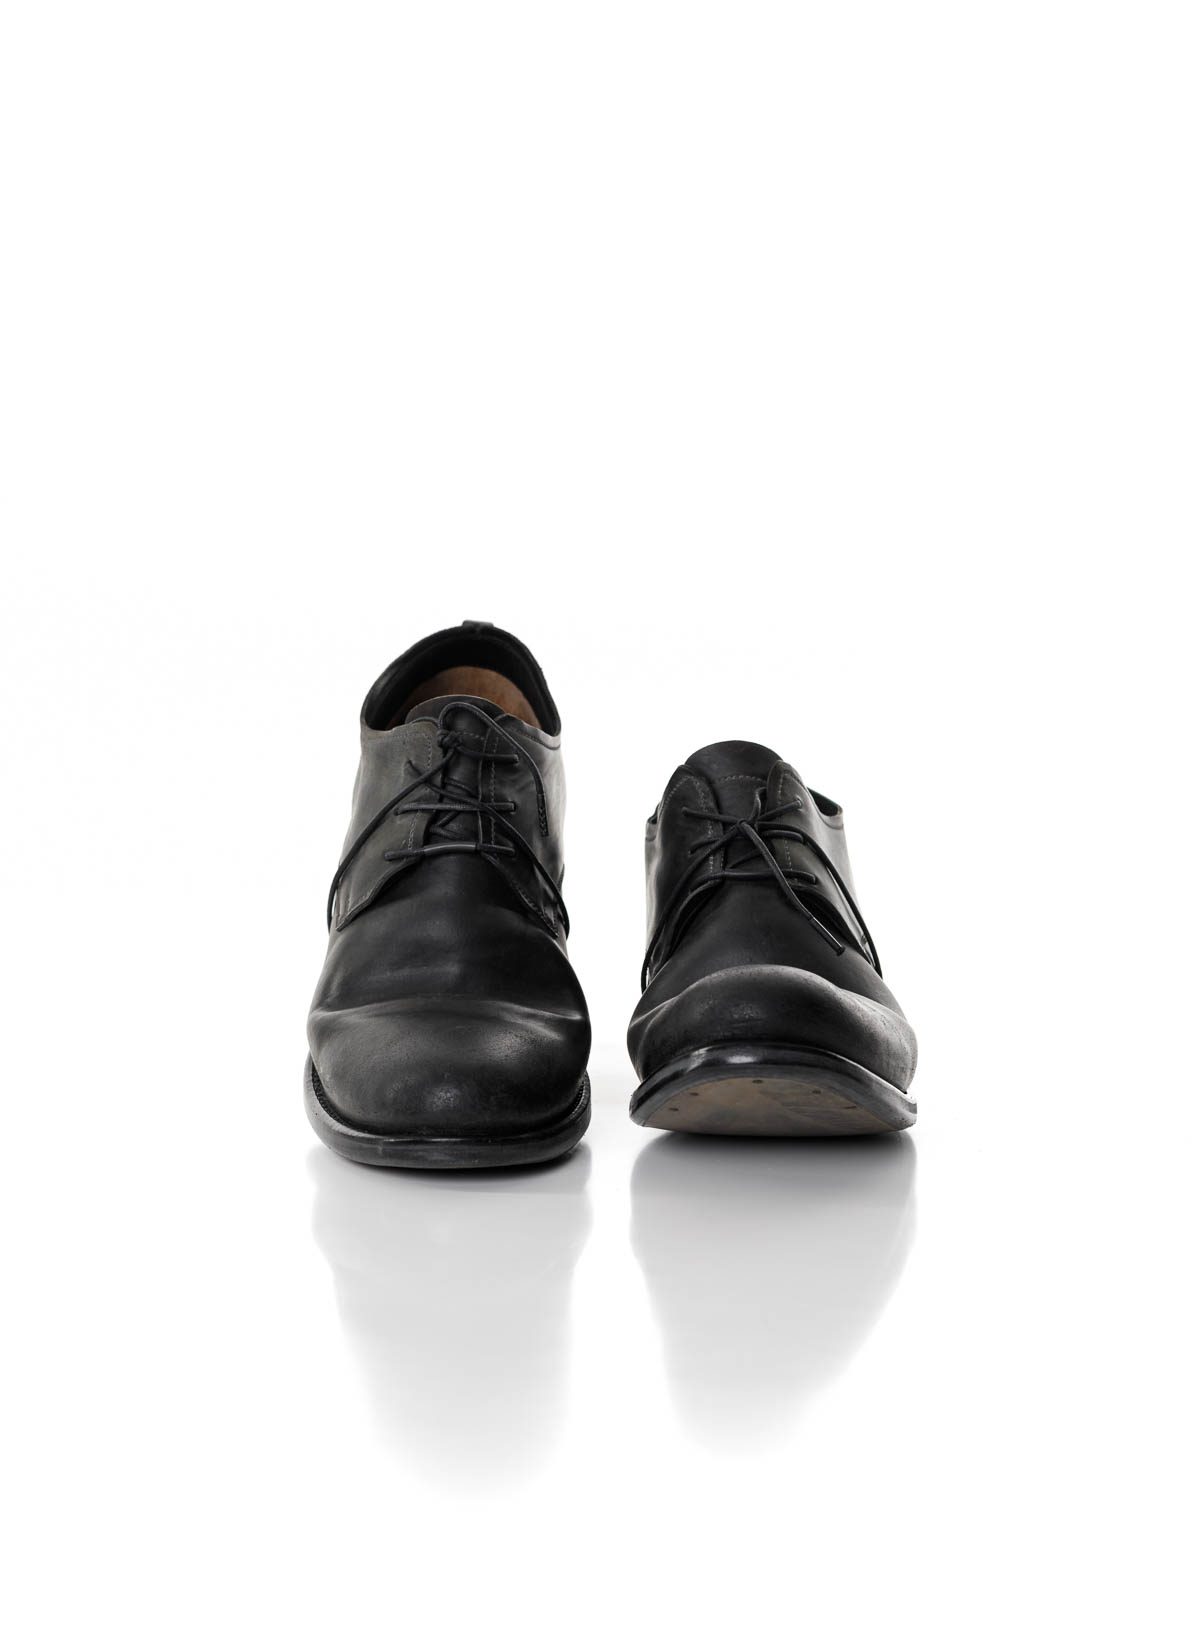 LAYER-0 Classic Derby Shoe 1.5 H7 GY, g.grey/black, shell cordovan